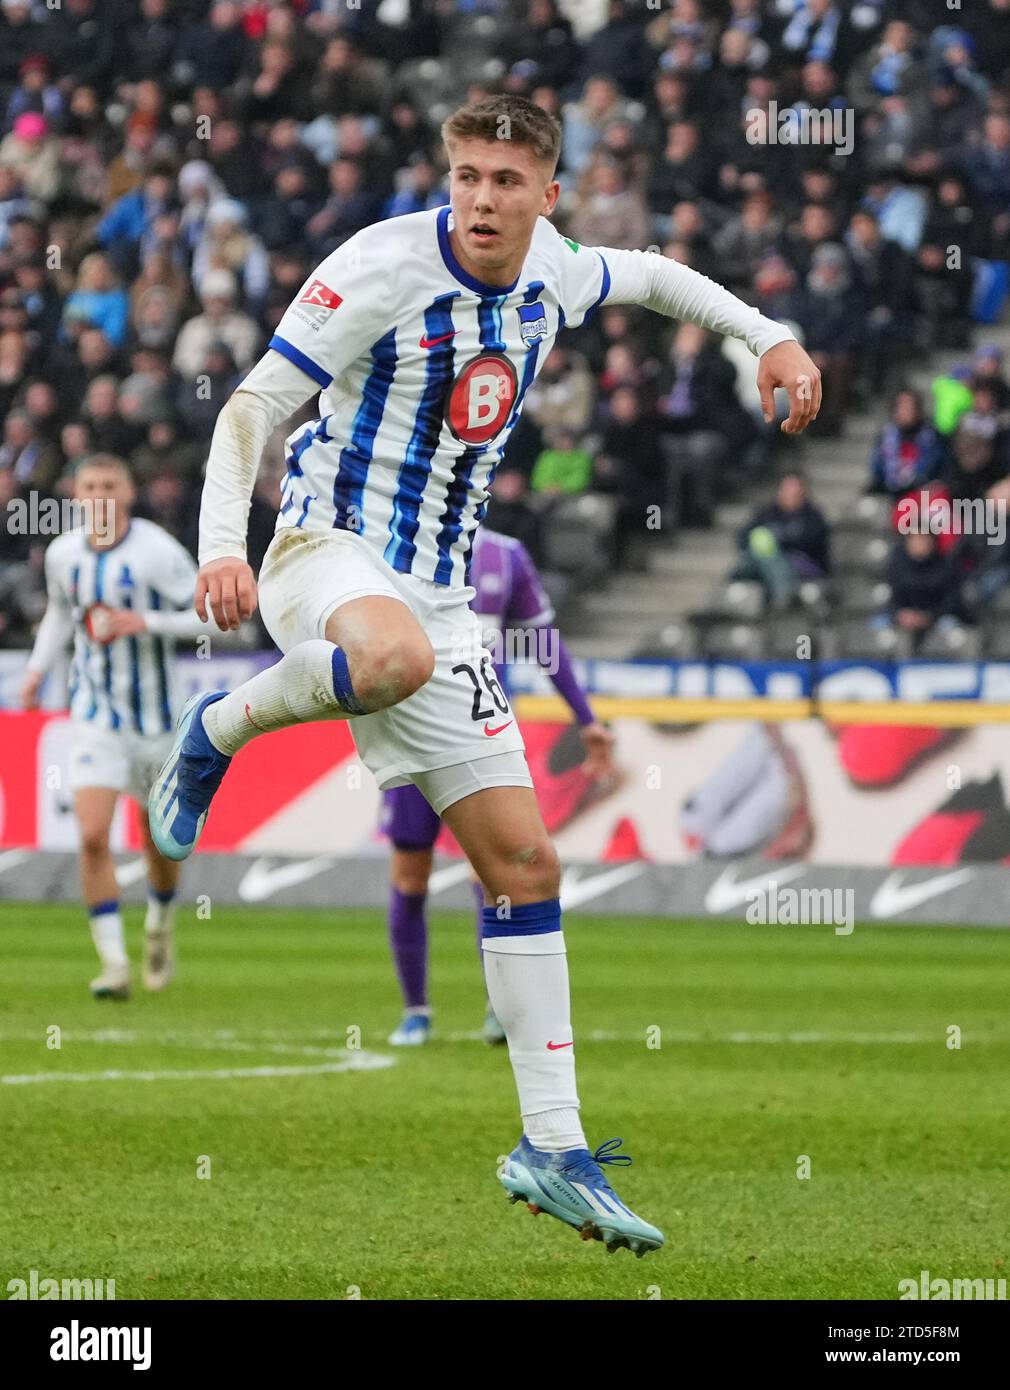 16 December 2023, Berlin: Soccer: Bundesliga 2, Hertha BSC - VfL Osnabrück, Matchday 17, Olympiastadion. Hertha's Gustav Christensen in action. Photo: Soeren Stache/dpa - IMPORTANT NOTE: In accordance with the regulations of the DFL German Football League and the DFB German Football Association, it is prohibited to utilize or have utilized photographs taken in the stadium and/or of the match in the form of sequential images and/or video-like photo series. Stock Photo